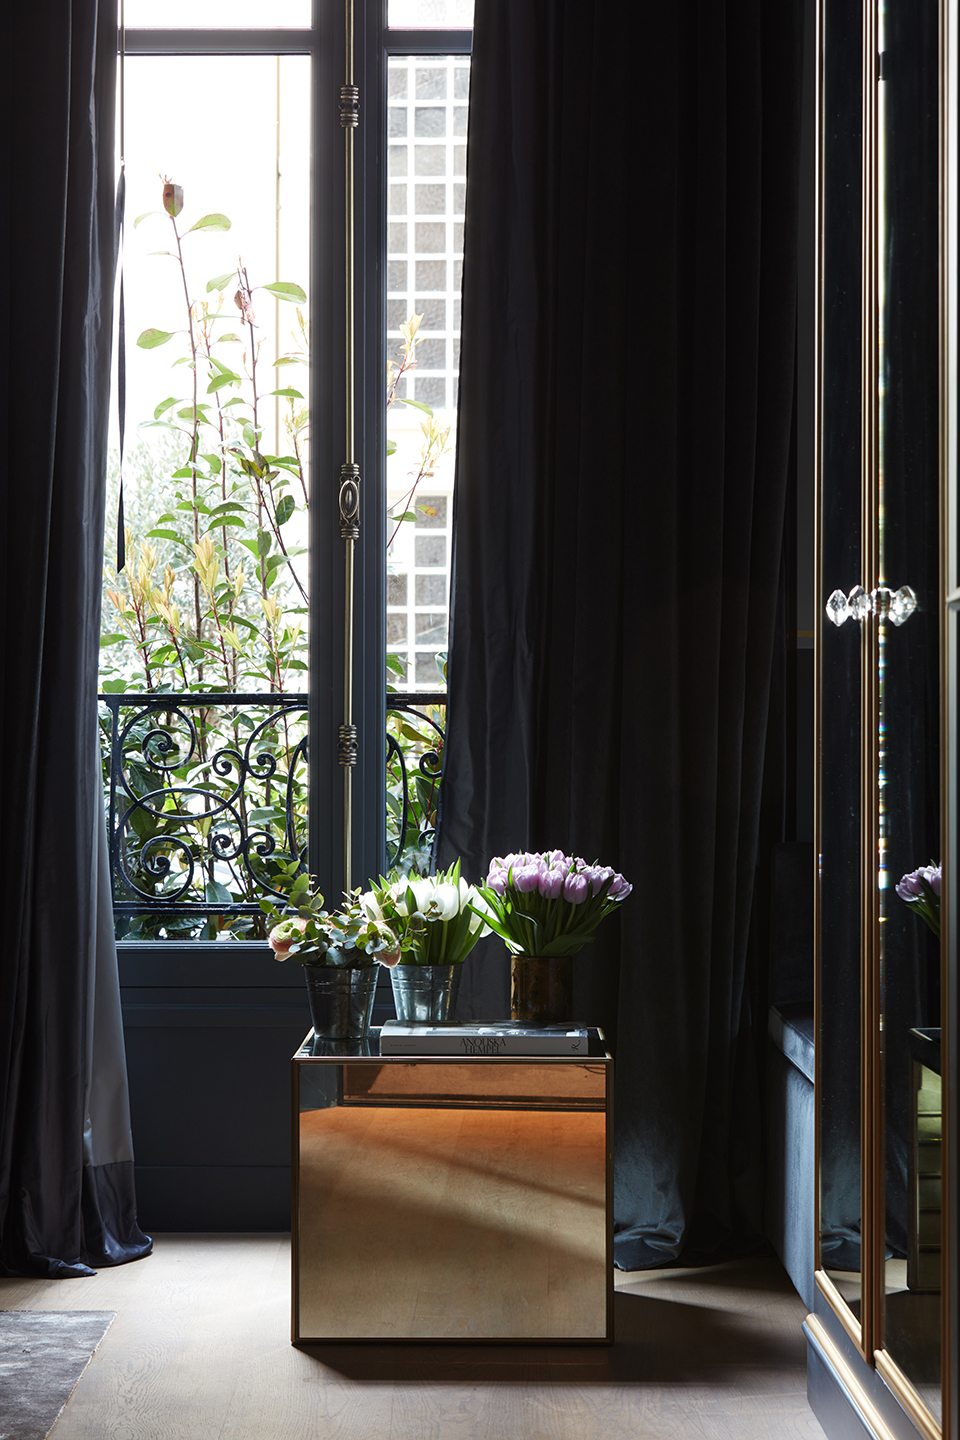 Drapery over crisp French doors, with brass window furniture and wrought-iron balconies from an integral part of Anouska Hempel's scheme for Monsieur George - Effect Magazine